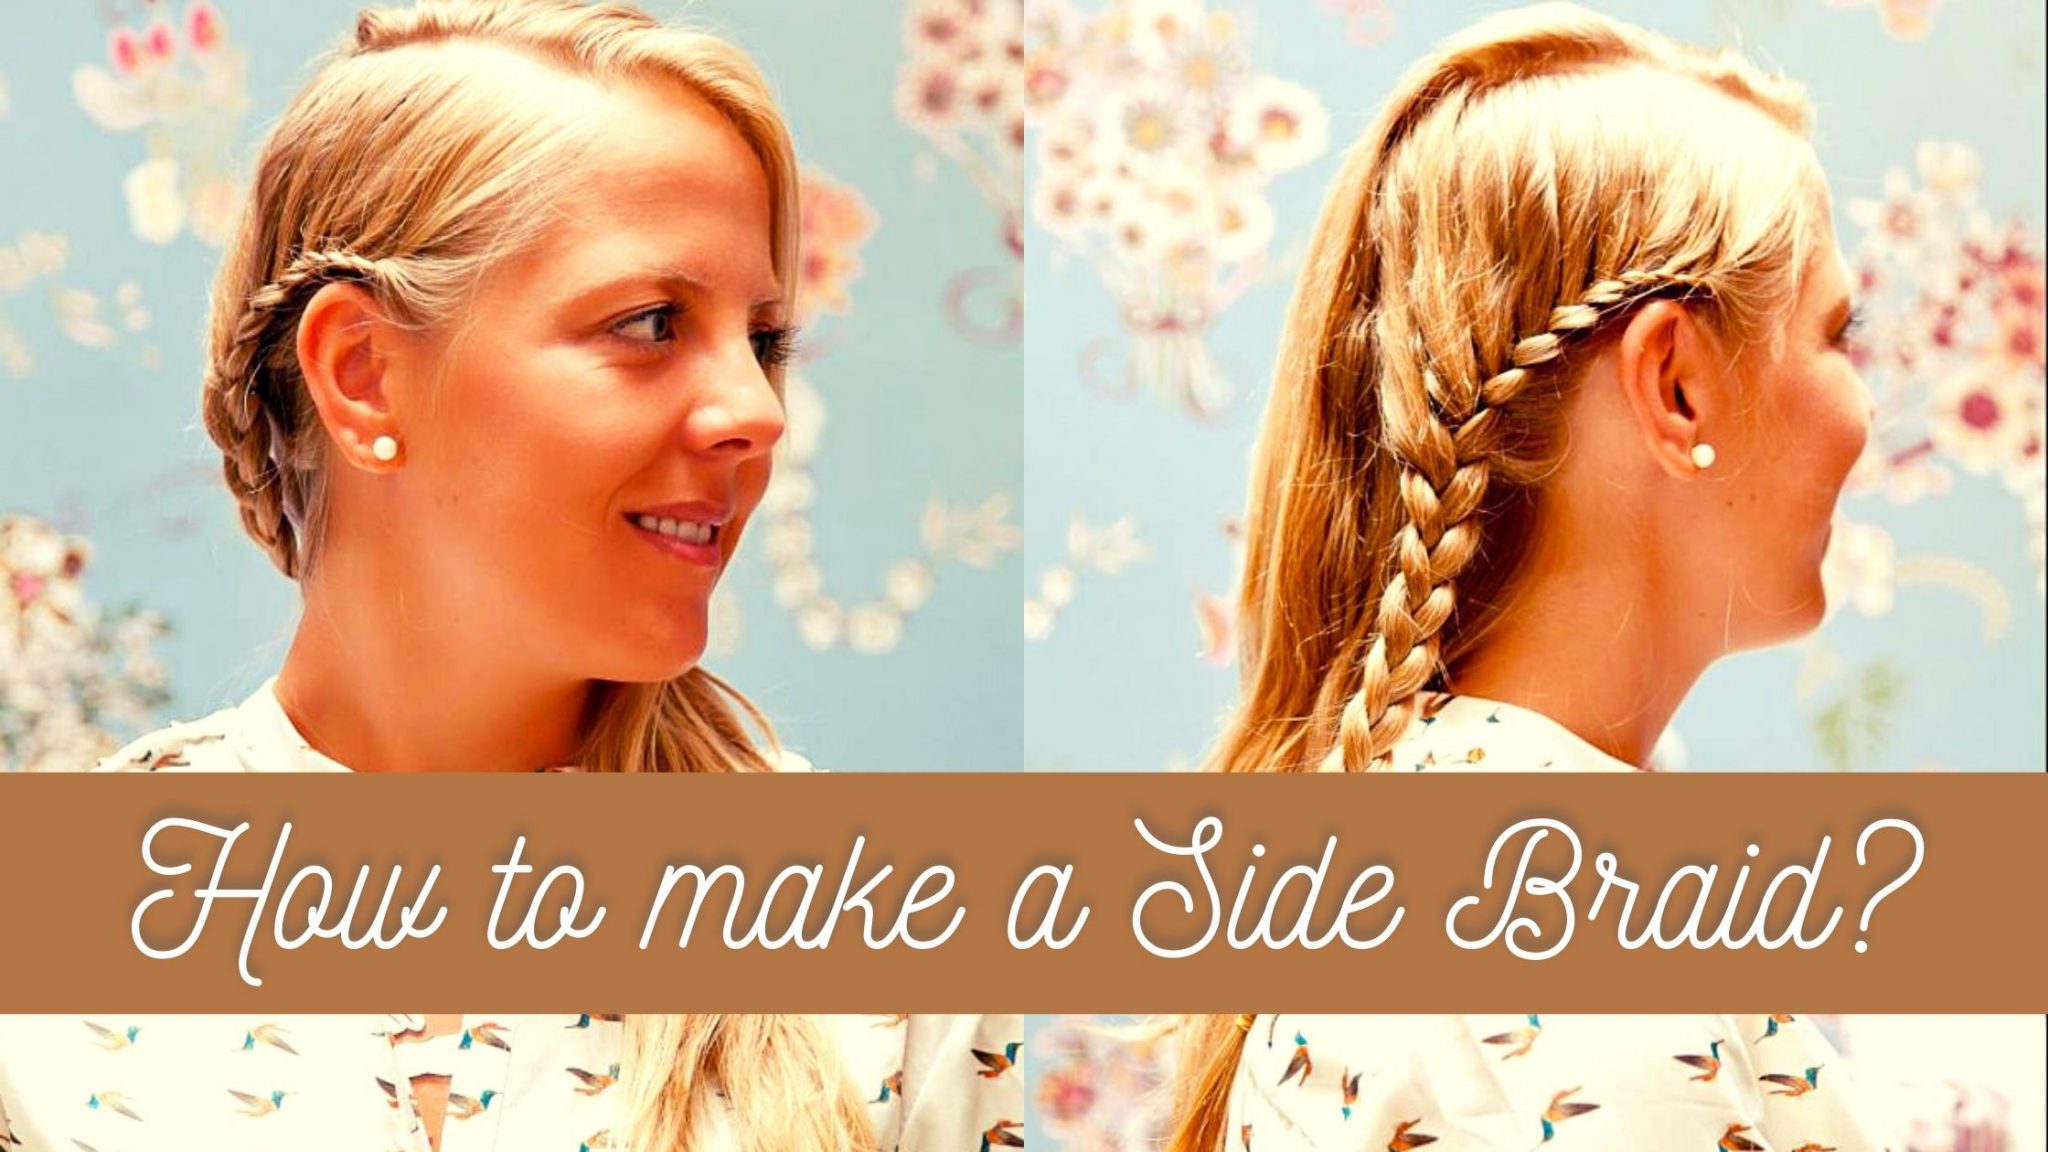 How to Make a Side Braid: Step-by-Step Guide